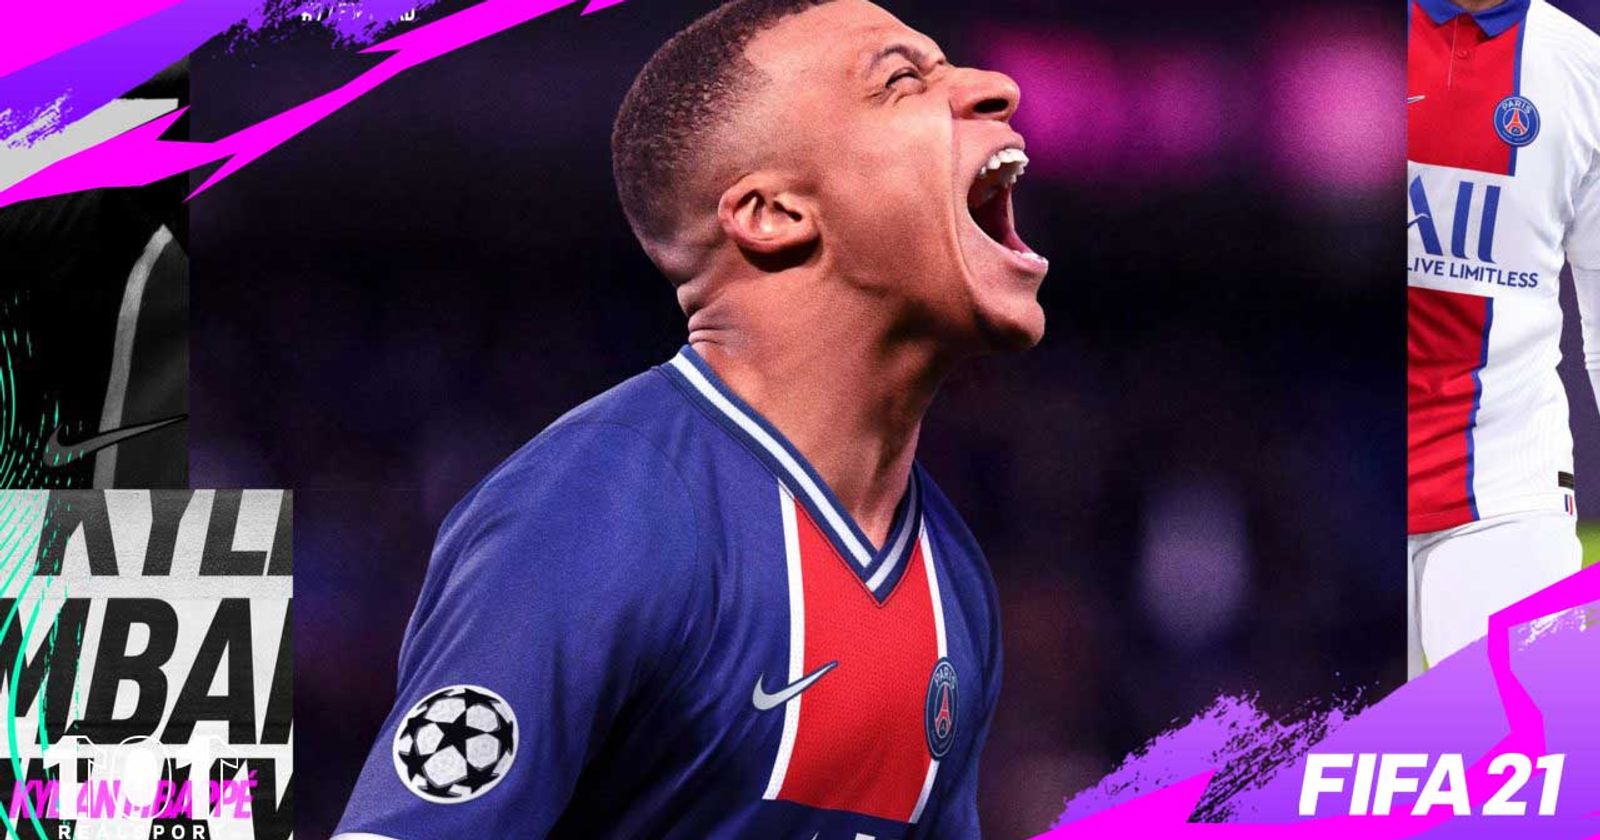 EA says FIFA 21 on PC won't get the PS5 and Xbox Series X features